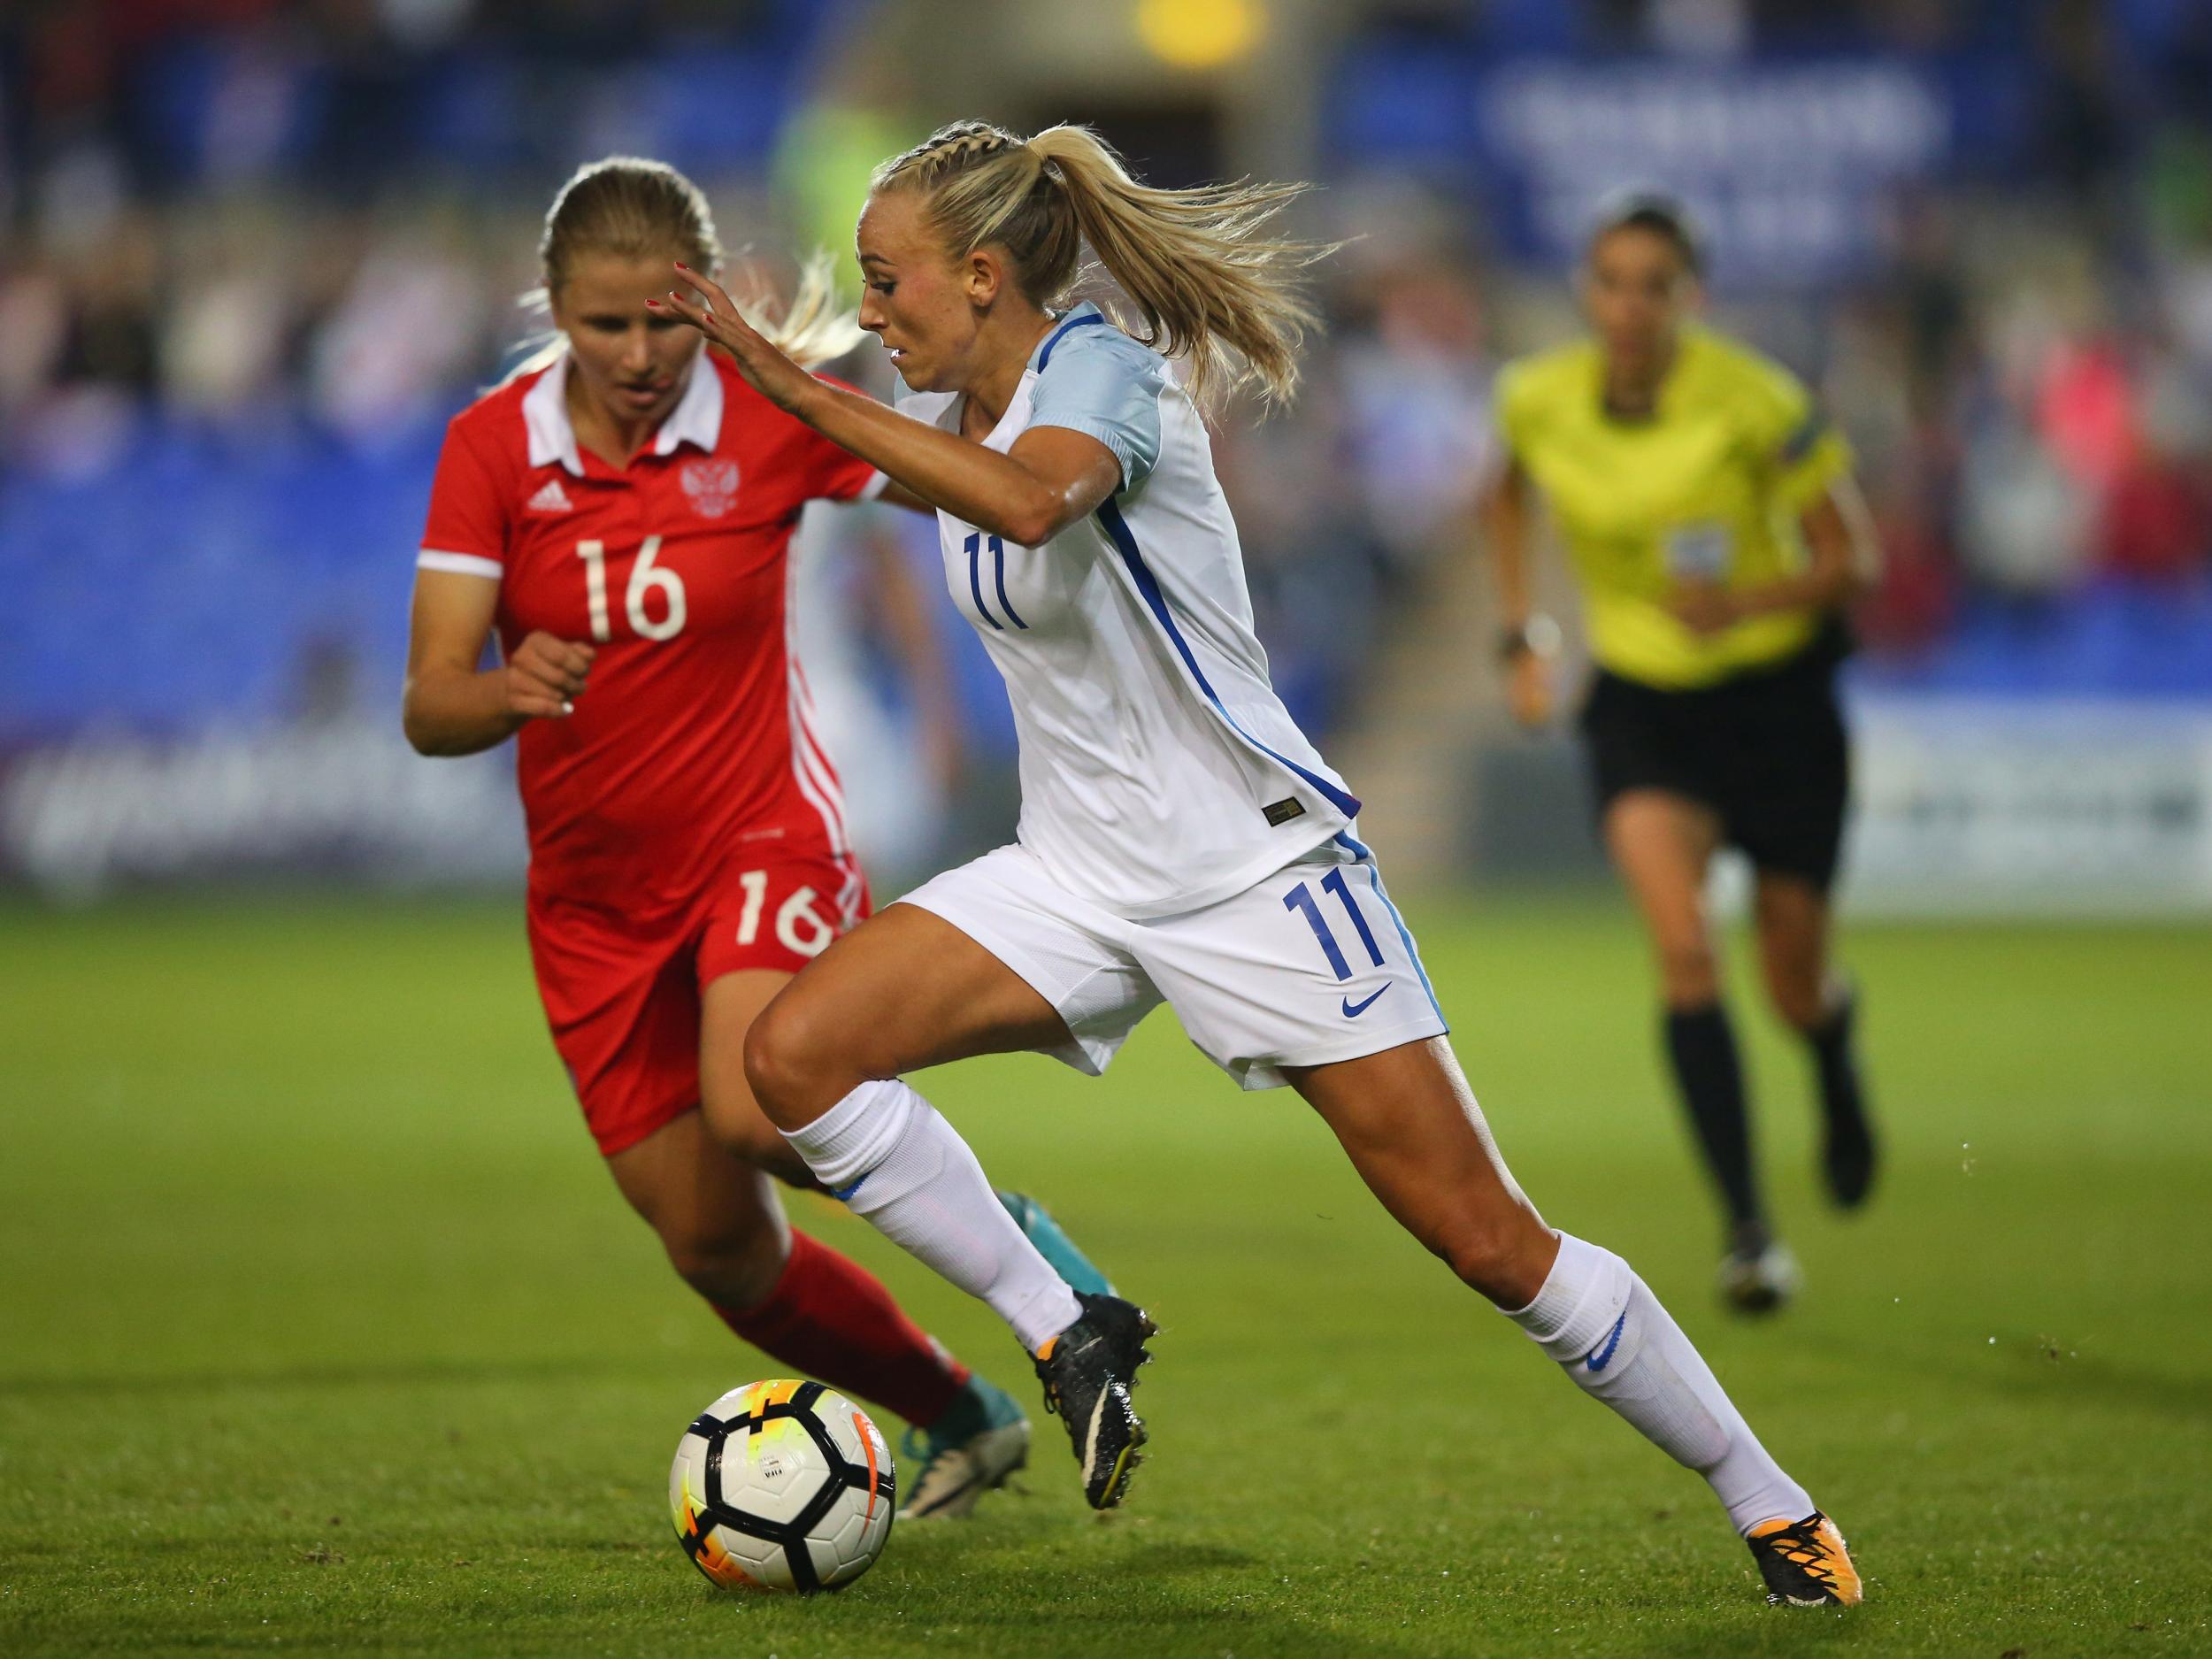 Toni Duggan wrapped up the scoring with her late double